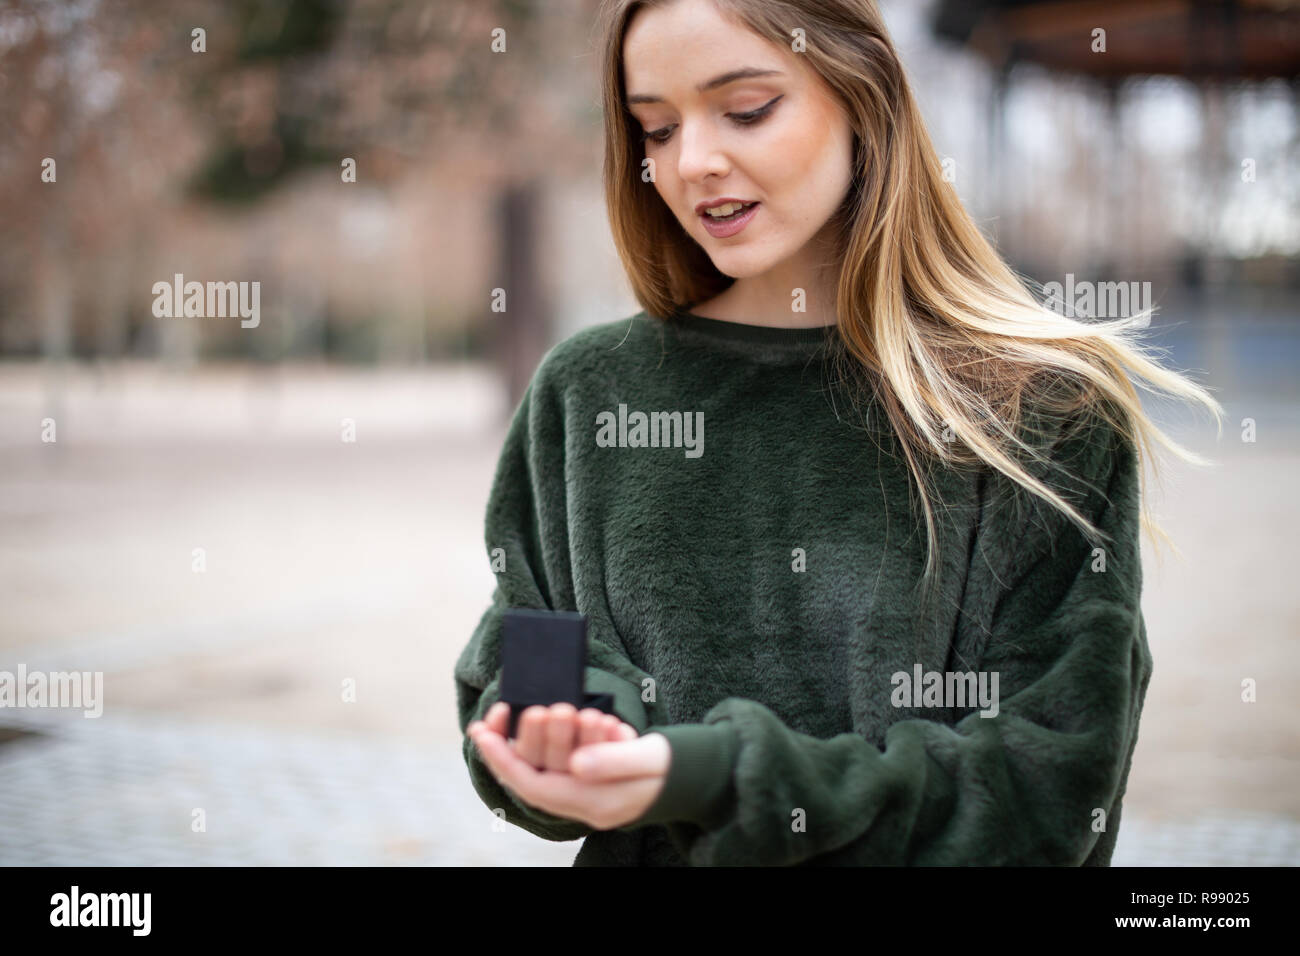 Beautiful young lady in stylish outfit looking at wedding ring in box while standing on blurred Stock Photo